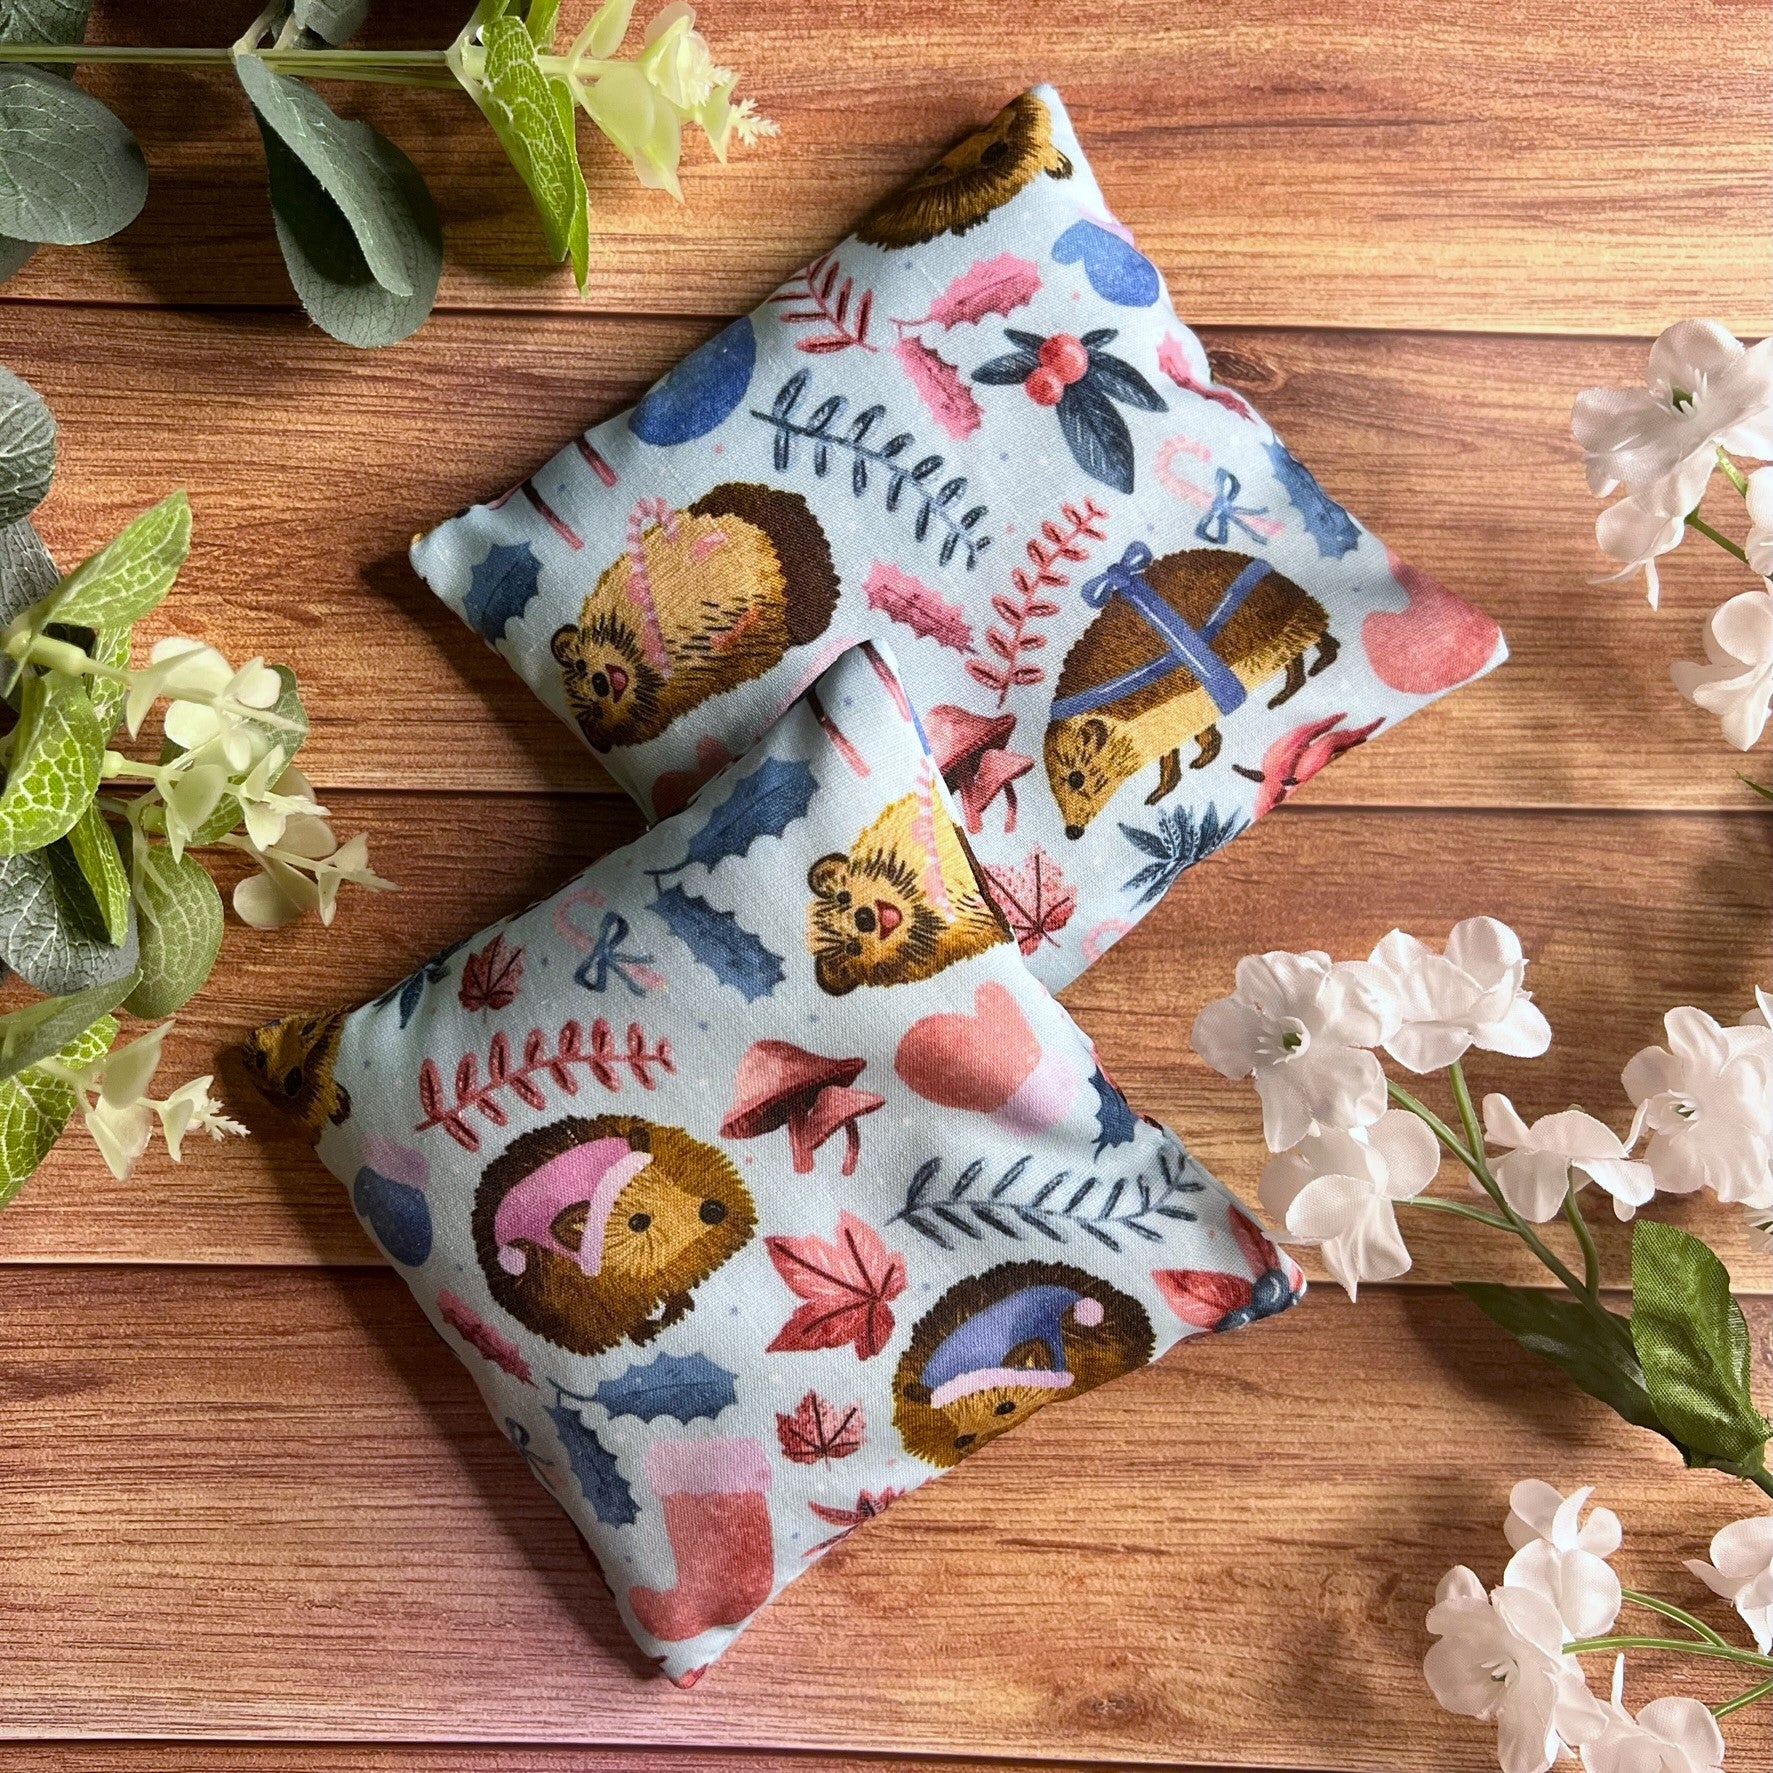 shop hand warmers gifts here with our lovely festive hedgehog pattern, and enjoy handmade crafts at christmastime